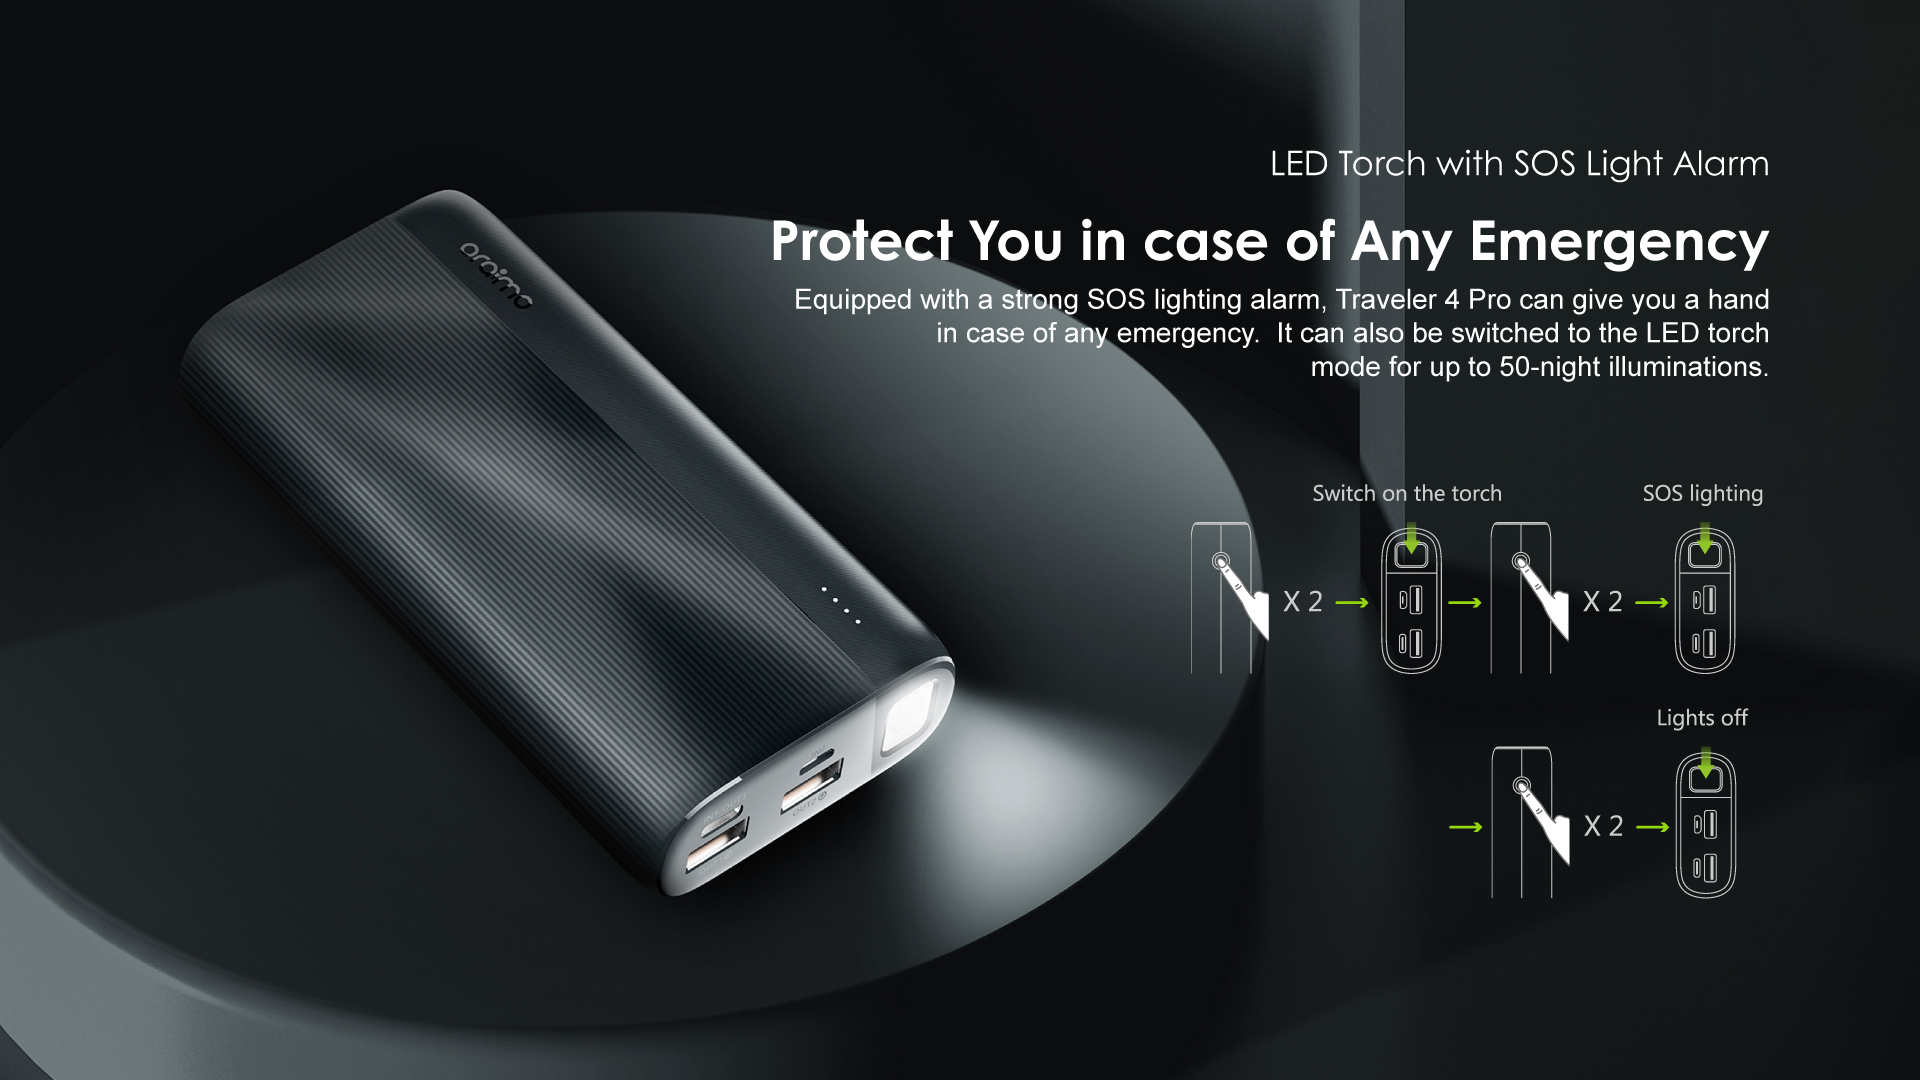 oraimo Traveler 4 Pro OPB-P204DQ 20W PD3.0 QC3.0 Quick Charge 20000mAh Power Bank